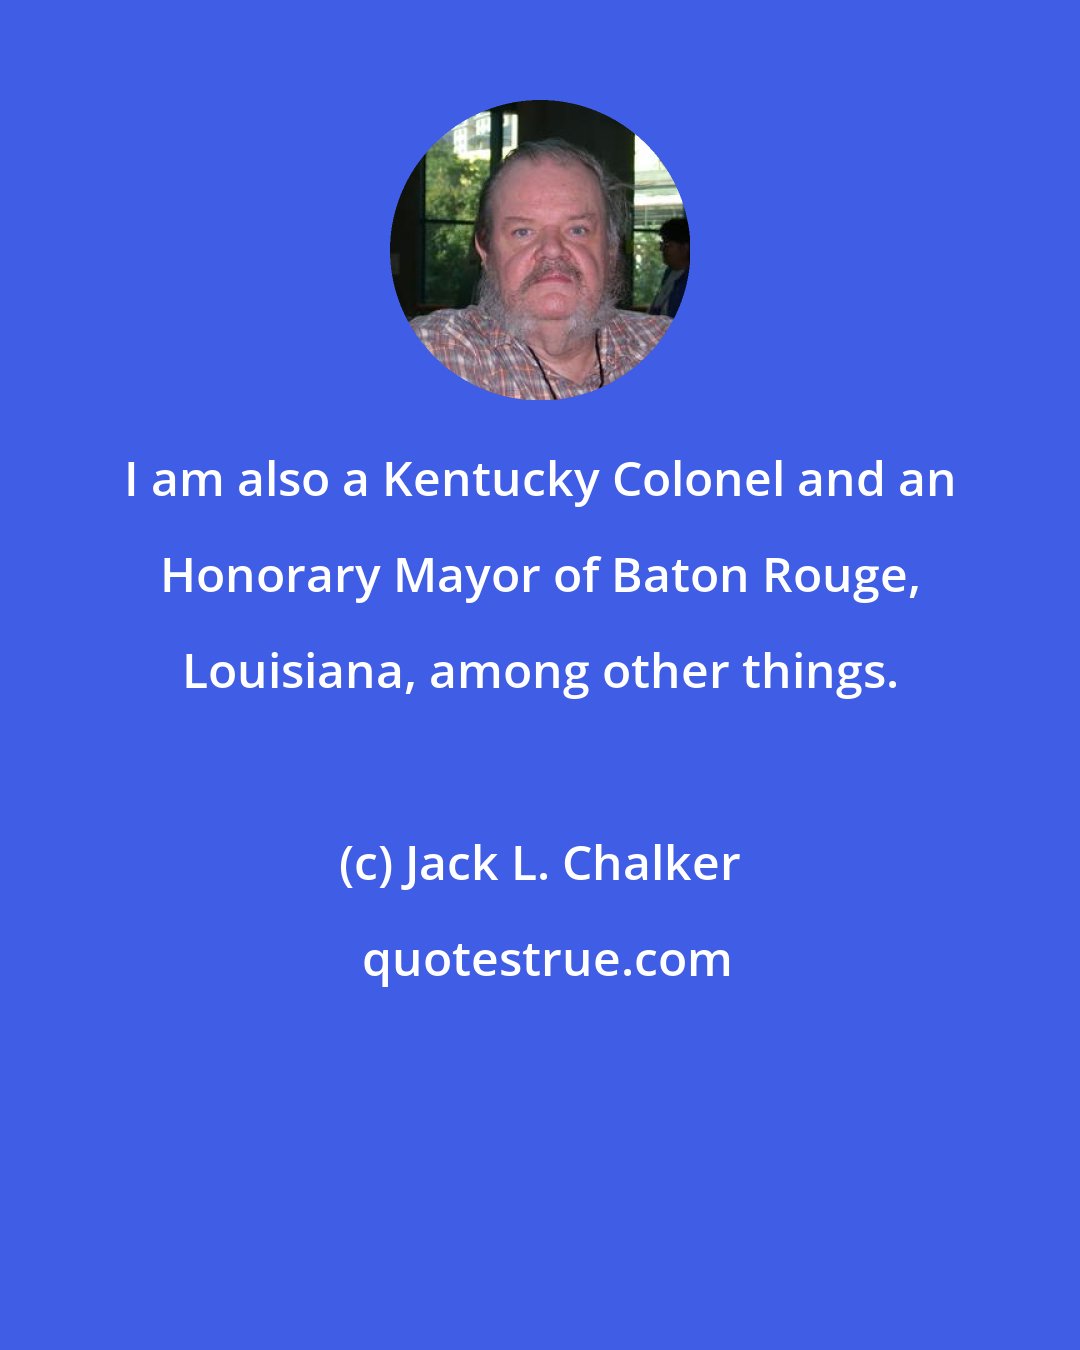 Jack L. Chalker: I am also a Kentucky Colonel and an Honorary Mayor of Baton Rouge, Louisiana, among other things.